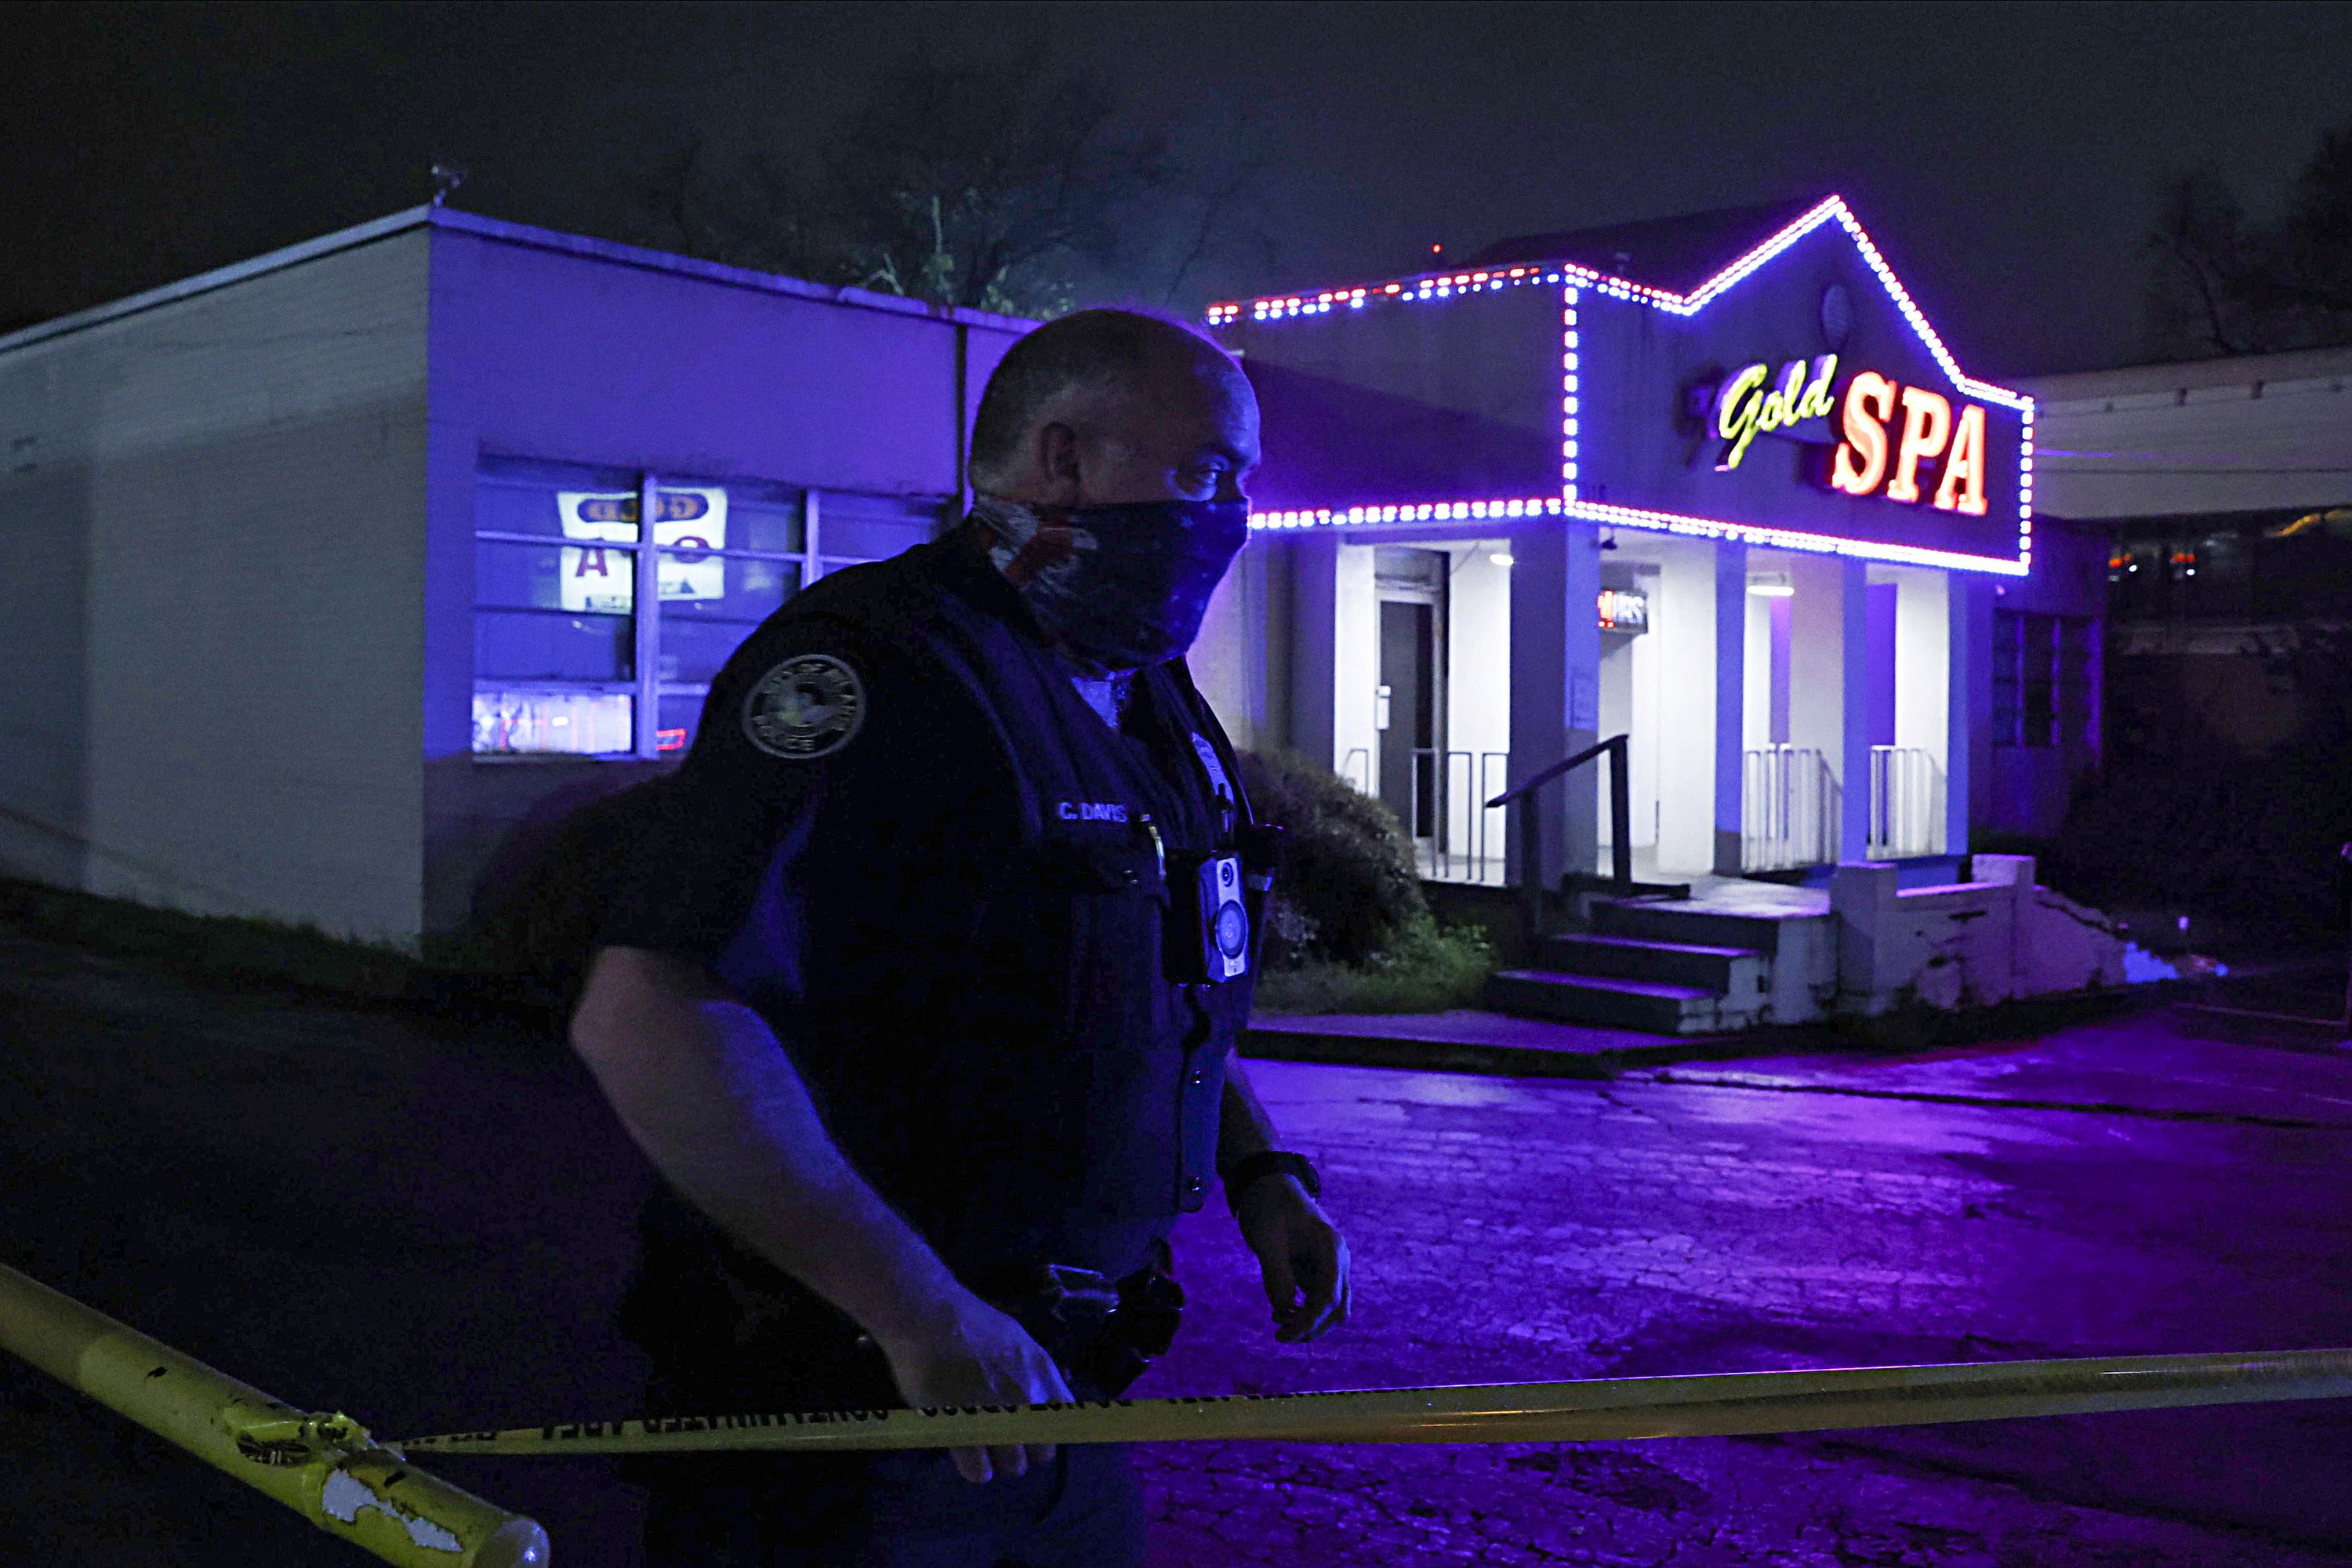 City of Atlanta Police Officer Davis works at the scene outside of Gold Spa after deadly shootings in the Atlanta area